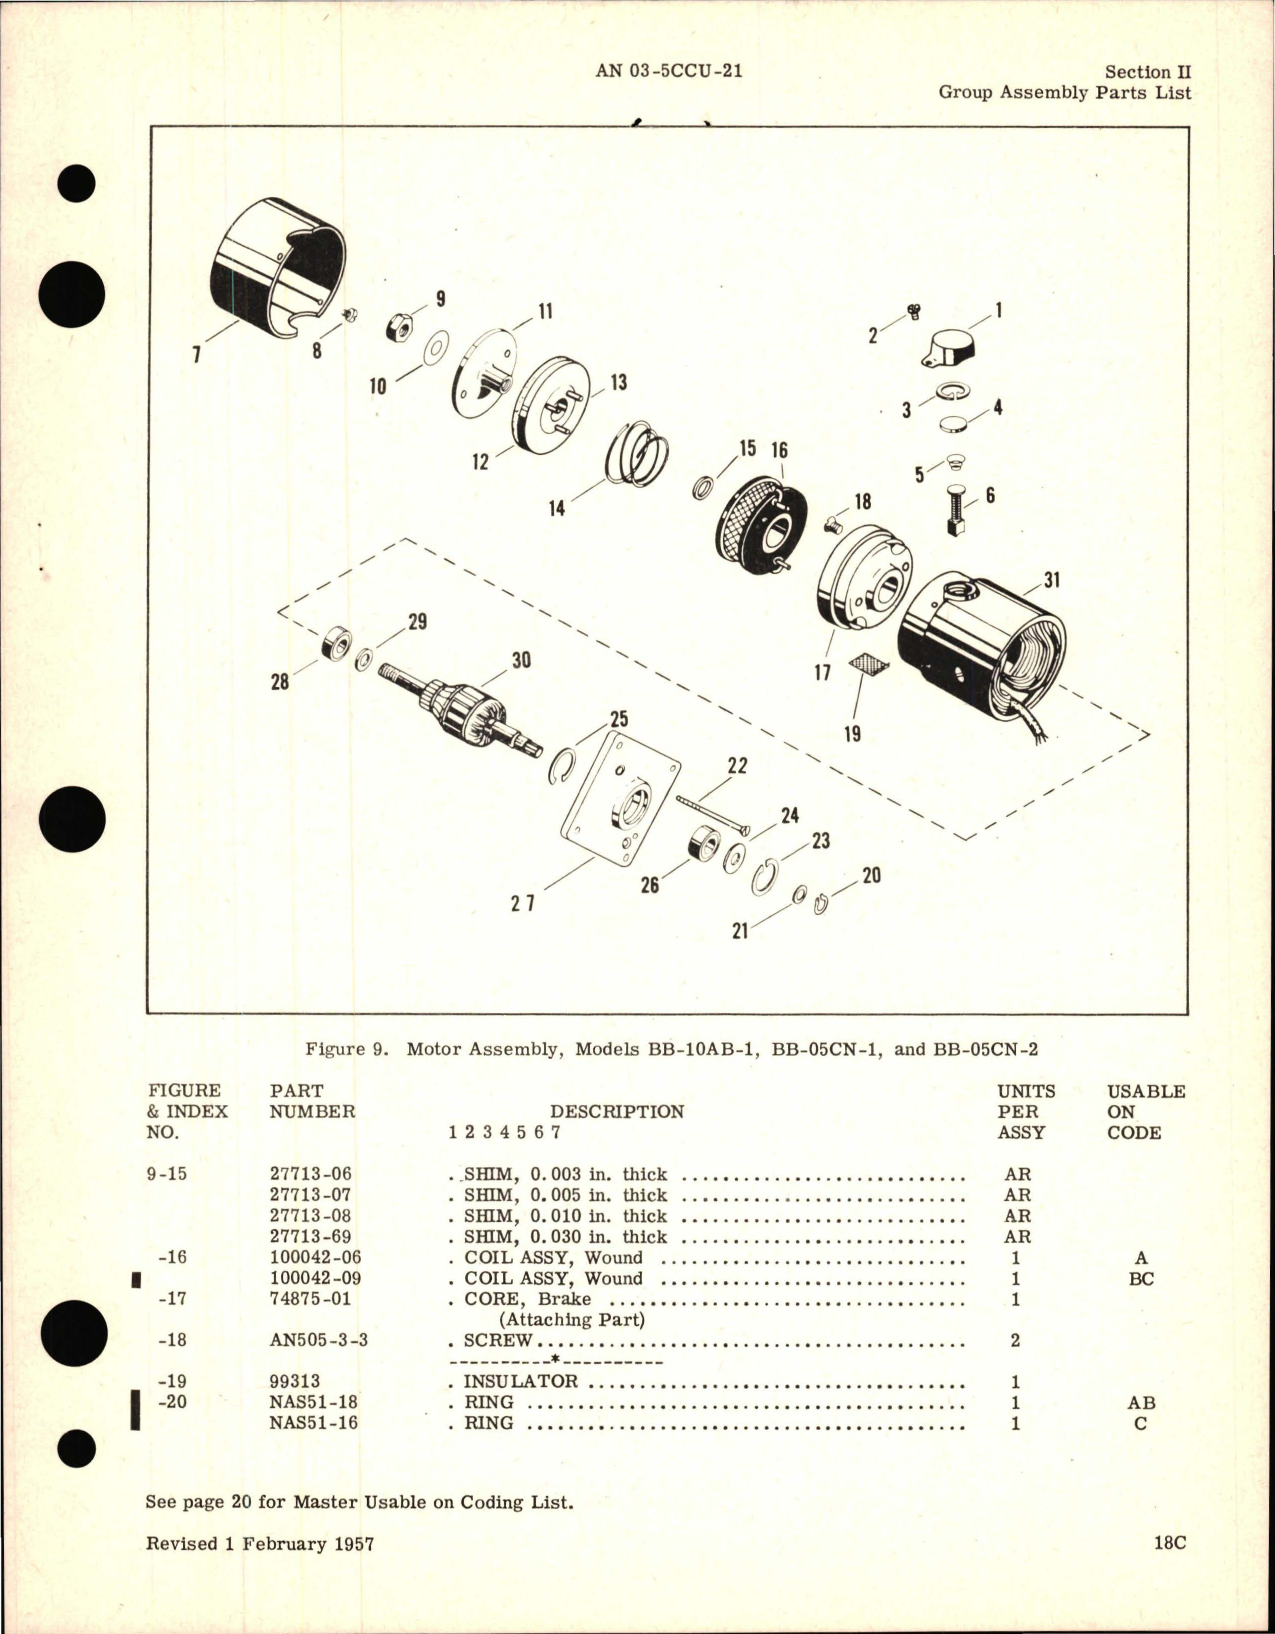 Sample page 5 from AirCorps Library document: Illustrated Parts Breakdown for Fractional Horsepower Motors - B Frame Series